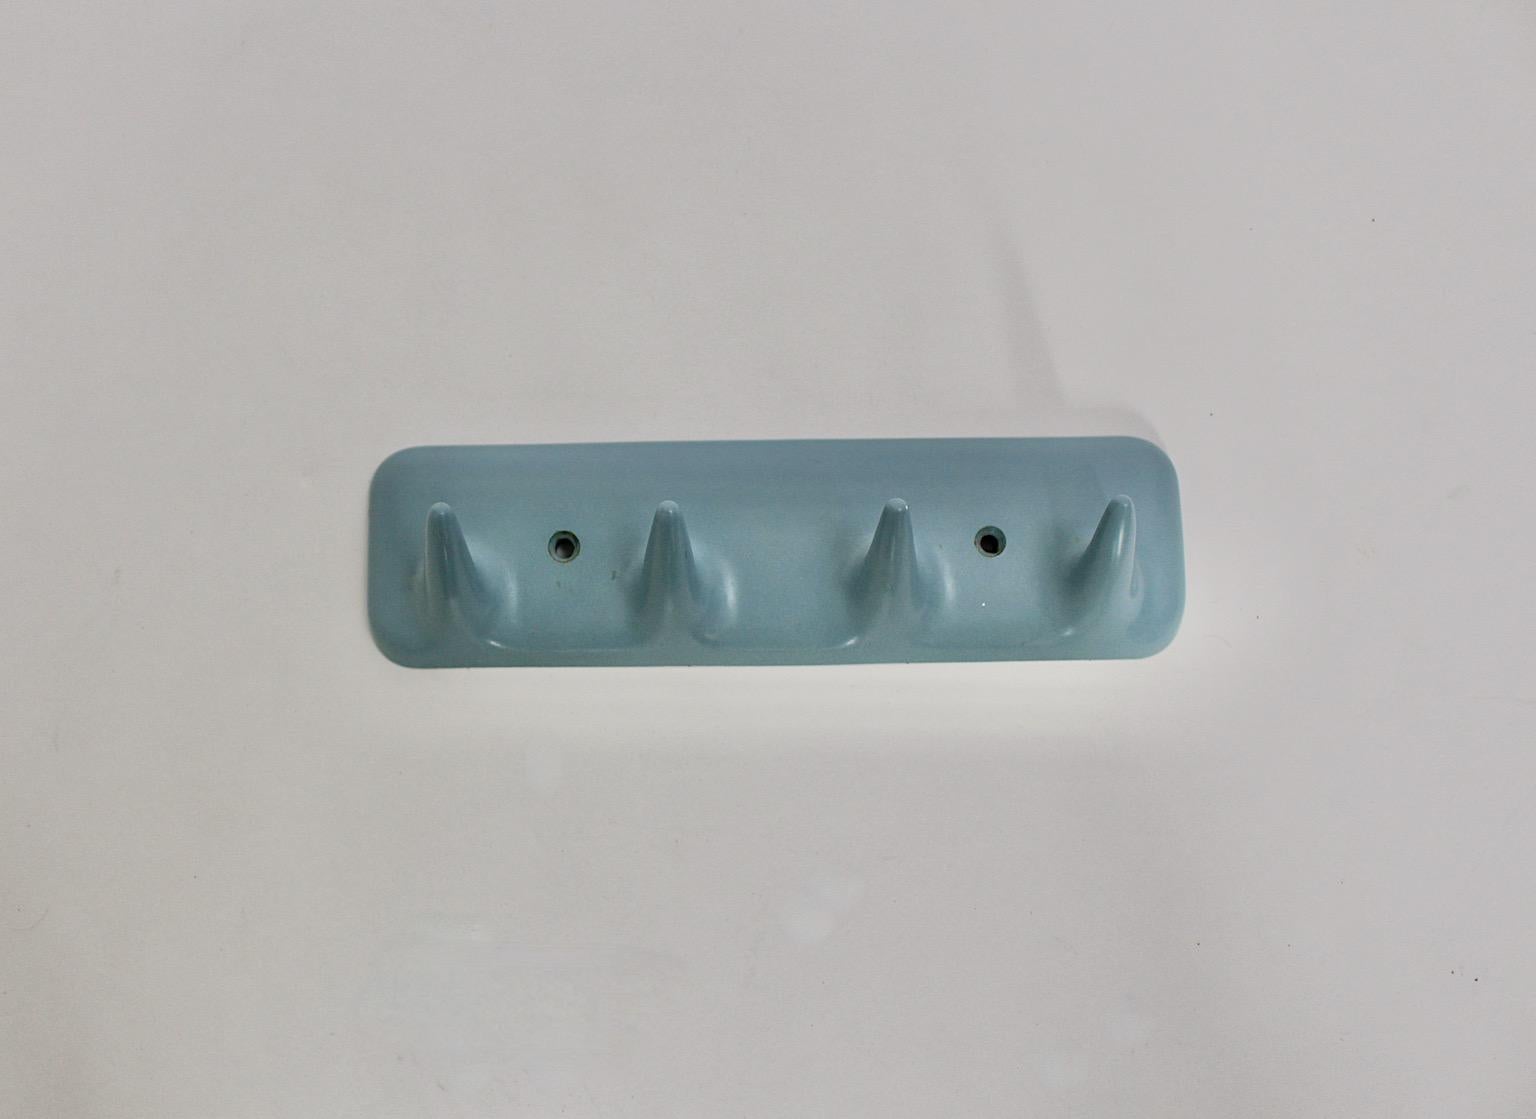 Mid-Century Modern vintage coat rack or wall hook from plastic in sky blue pastel color tone designed and manufactured 1950s Italy.
The rail shows 4 slightly curved hooks with approx. 3 cm length, which is easy to fix at the wall.
Stamped CM Mod.